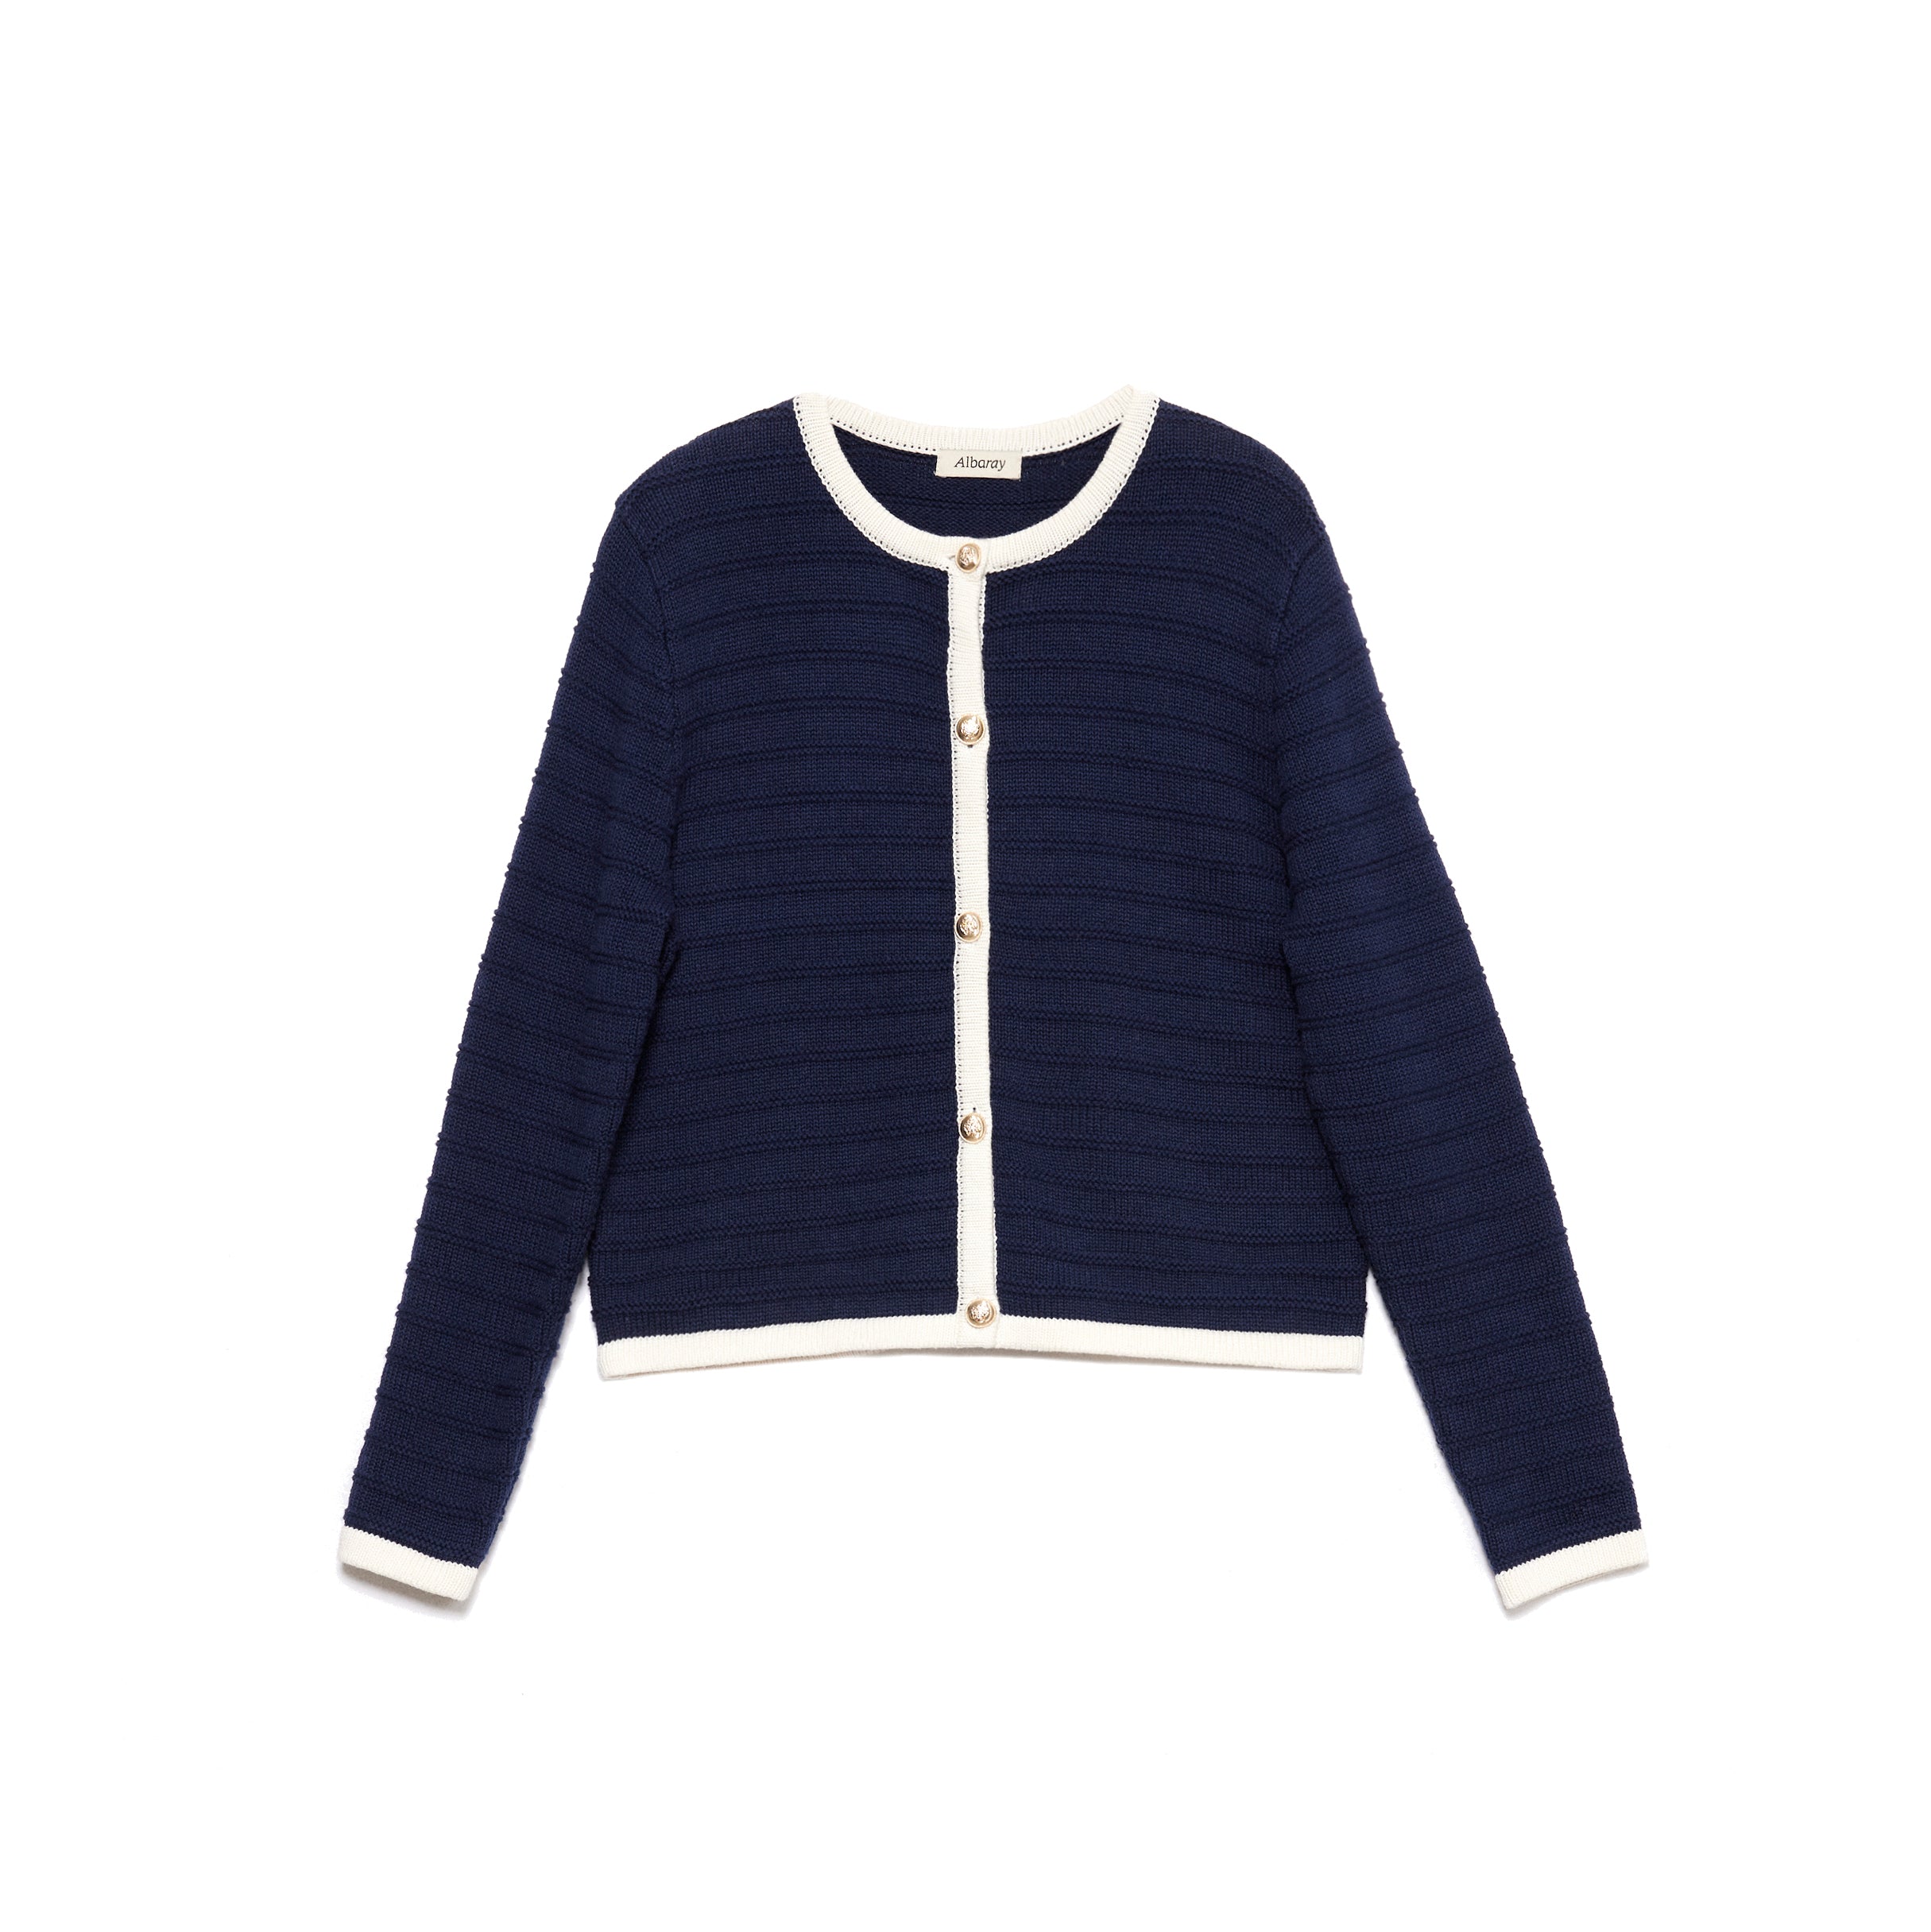 Knitted Contrast Trim Jacket